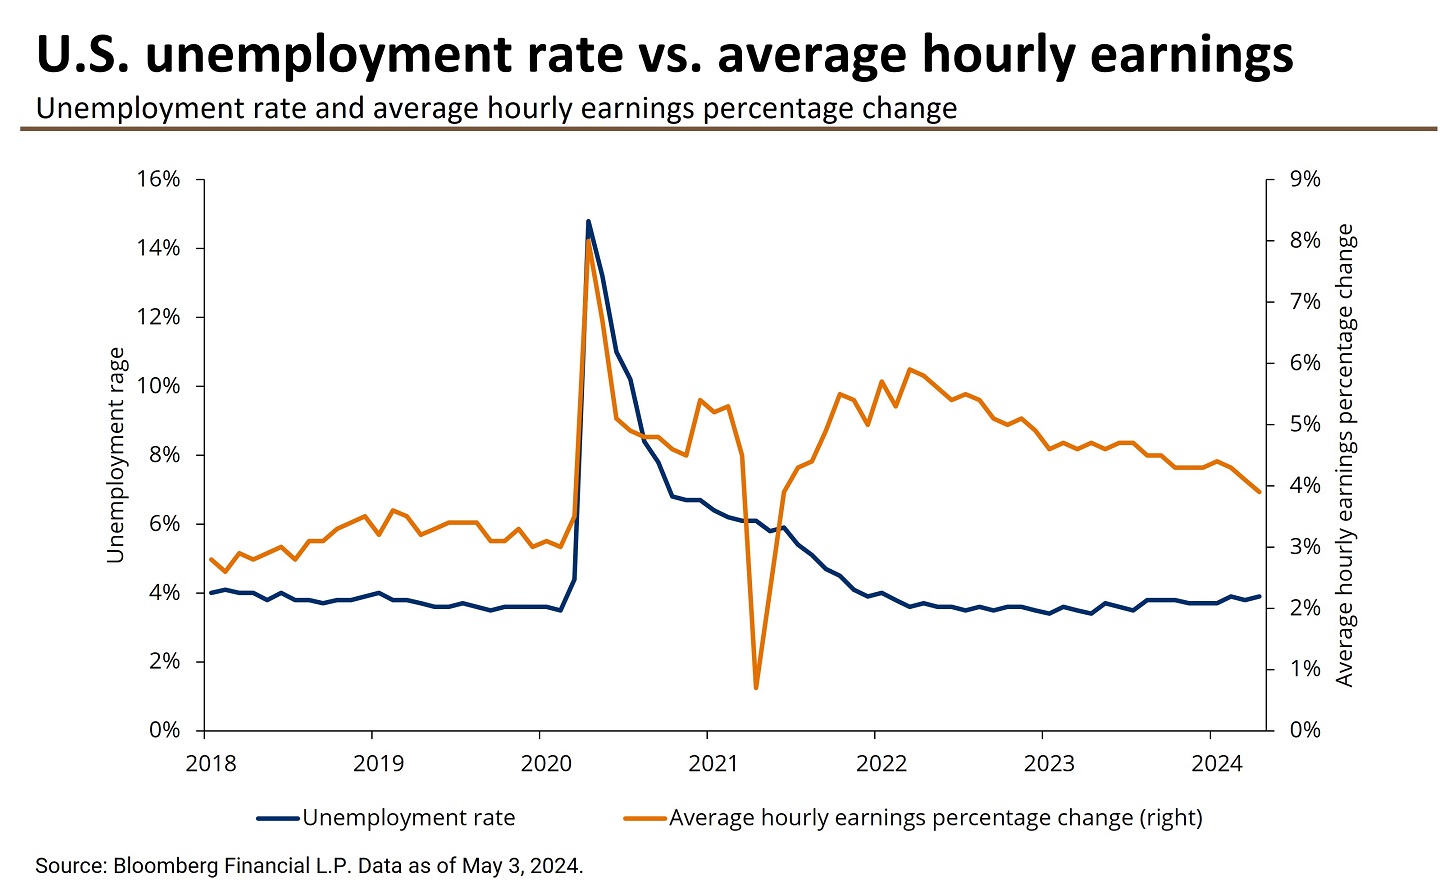 This chart shows the unemployment rate and average hourly earnings percentage change from January 2018 to April 2024.